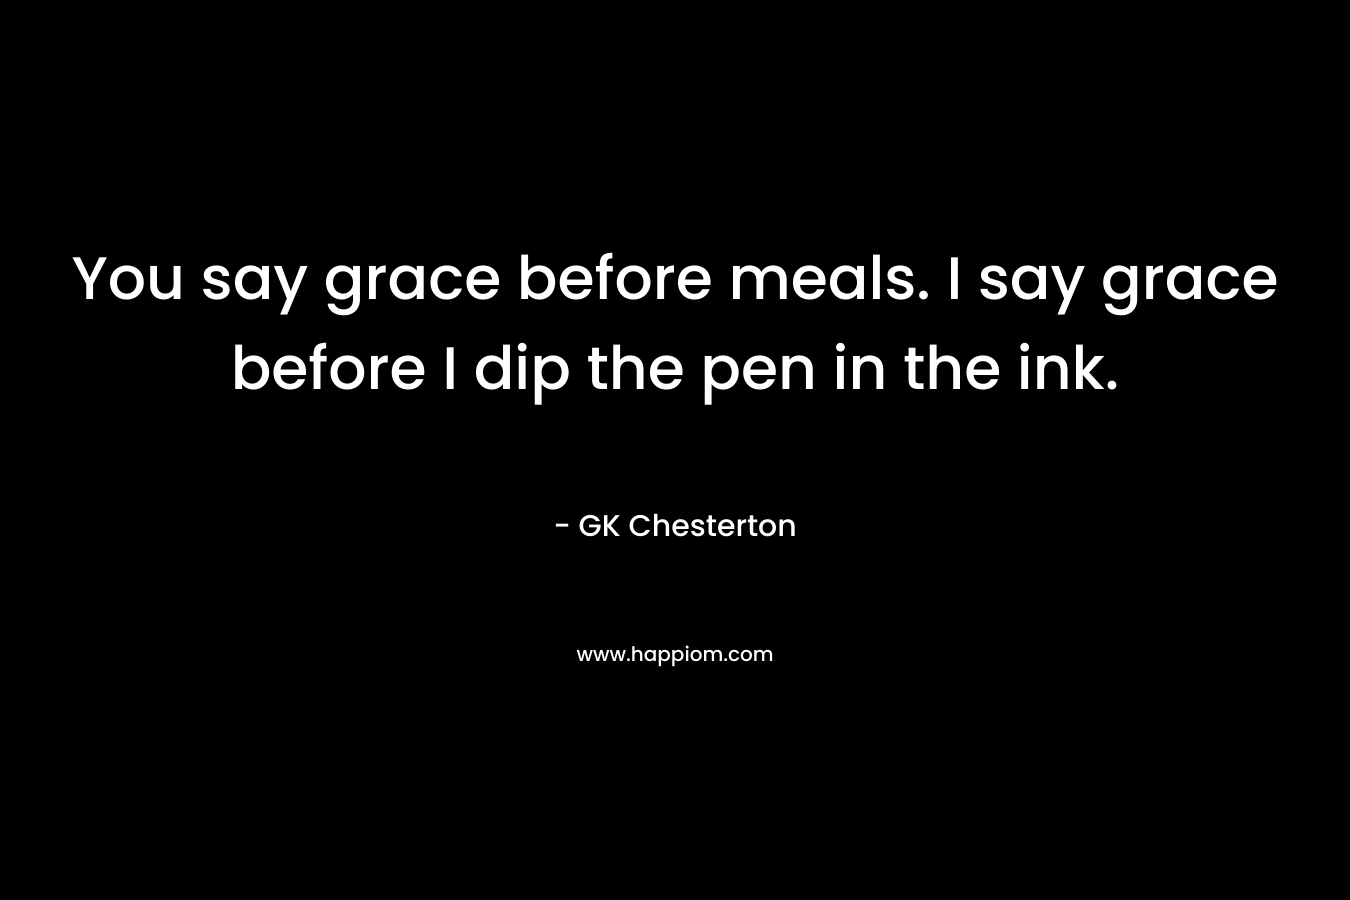 You say grace before meals. I say grace before I dip the pen in the ink. – GK Chesterton